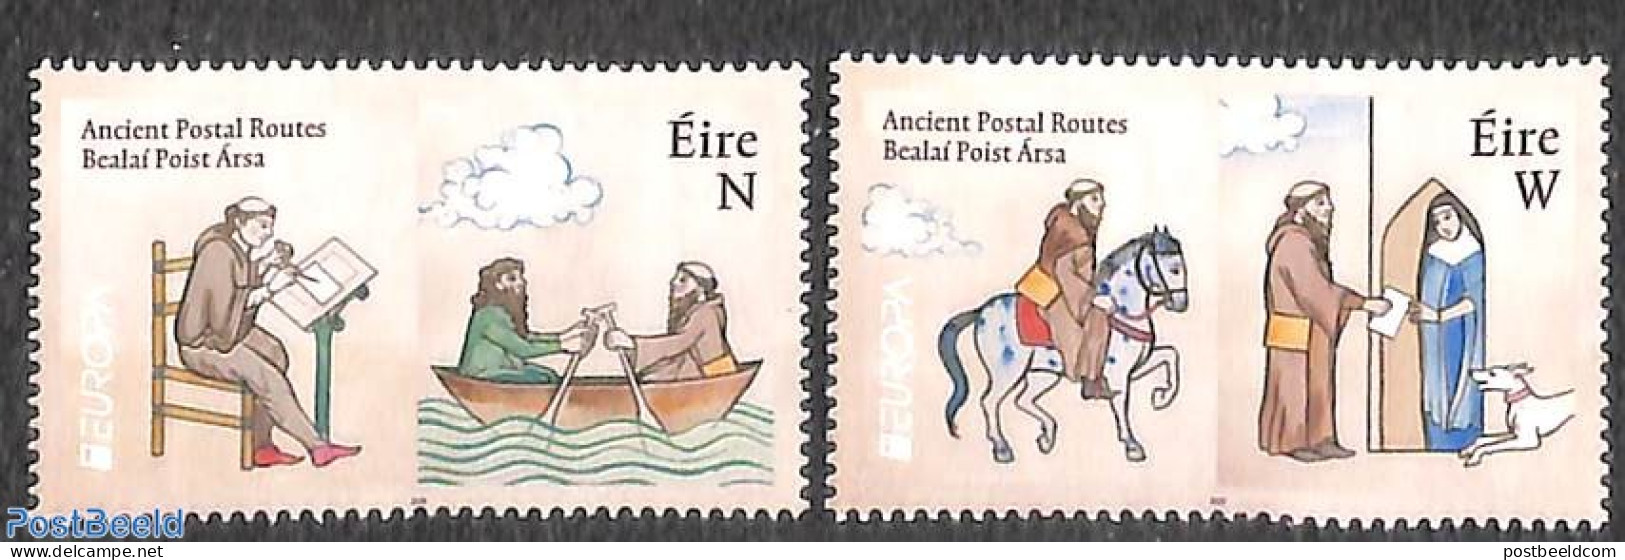 Ireland 2020 Europa, Old Postal Roads 2v, Mint NH, History - Nature - Transport - Europa (cept) - Horses - Post - Ship.. - Unused Stamps